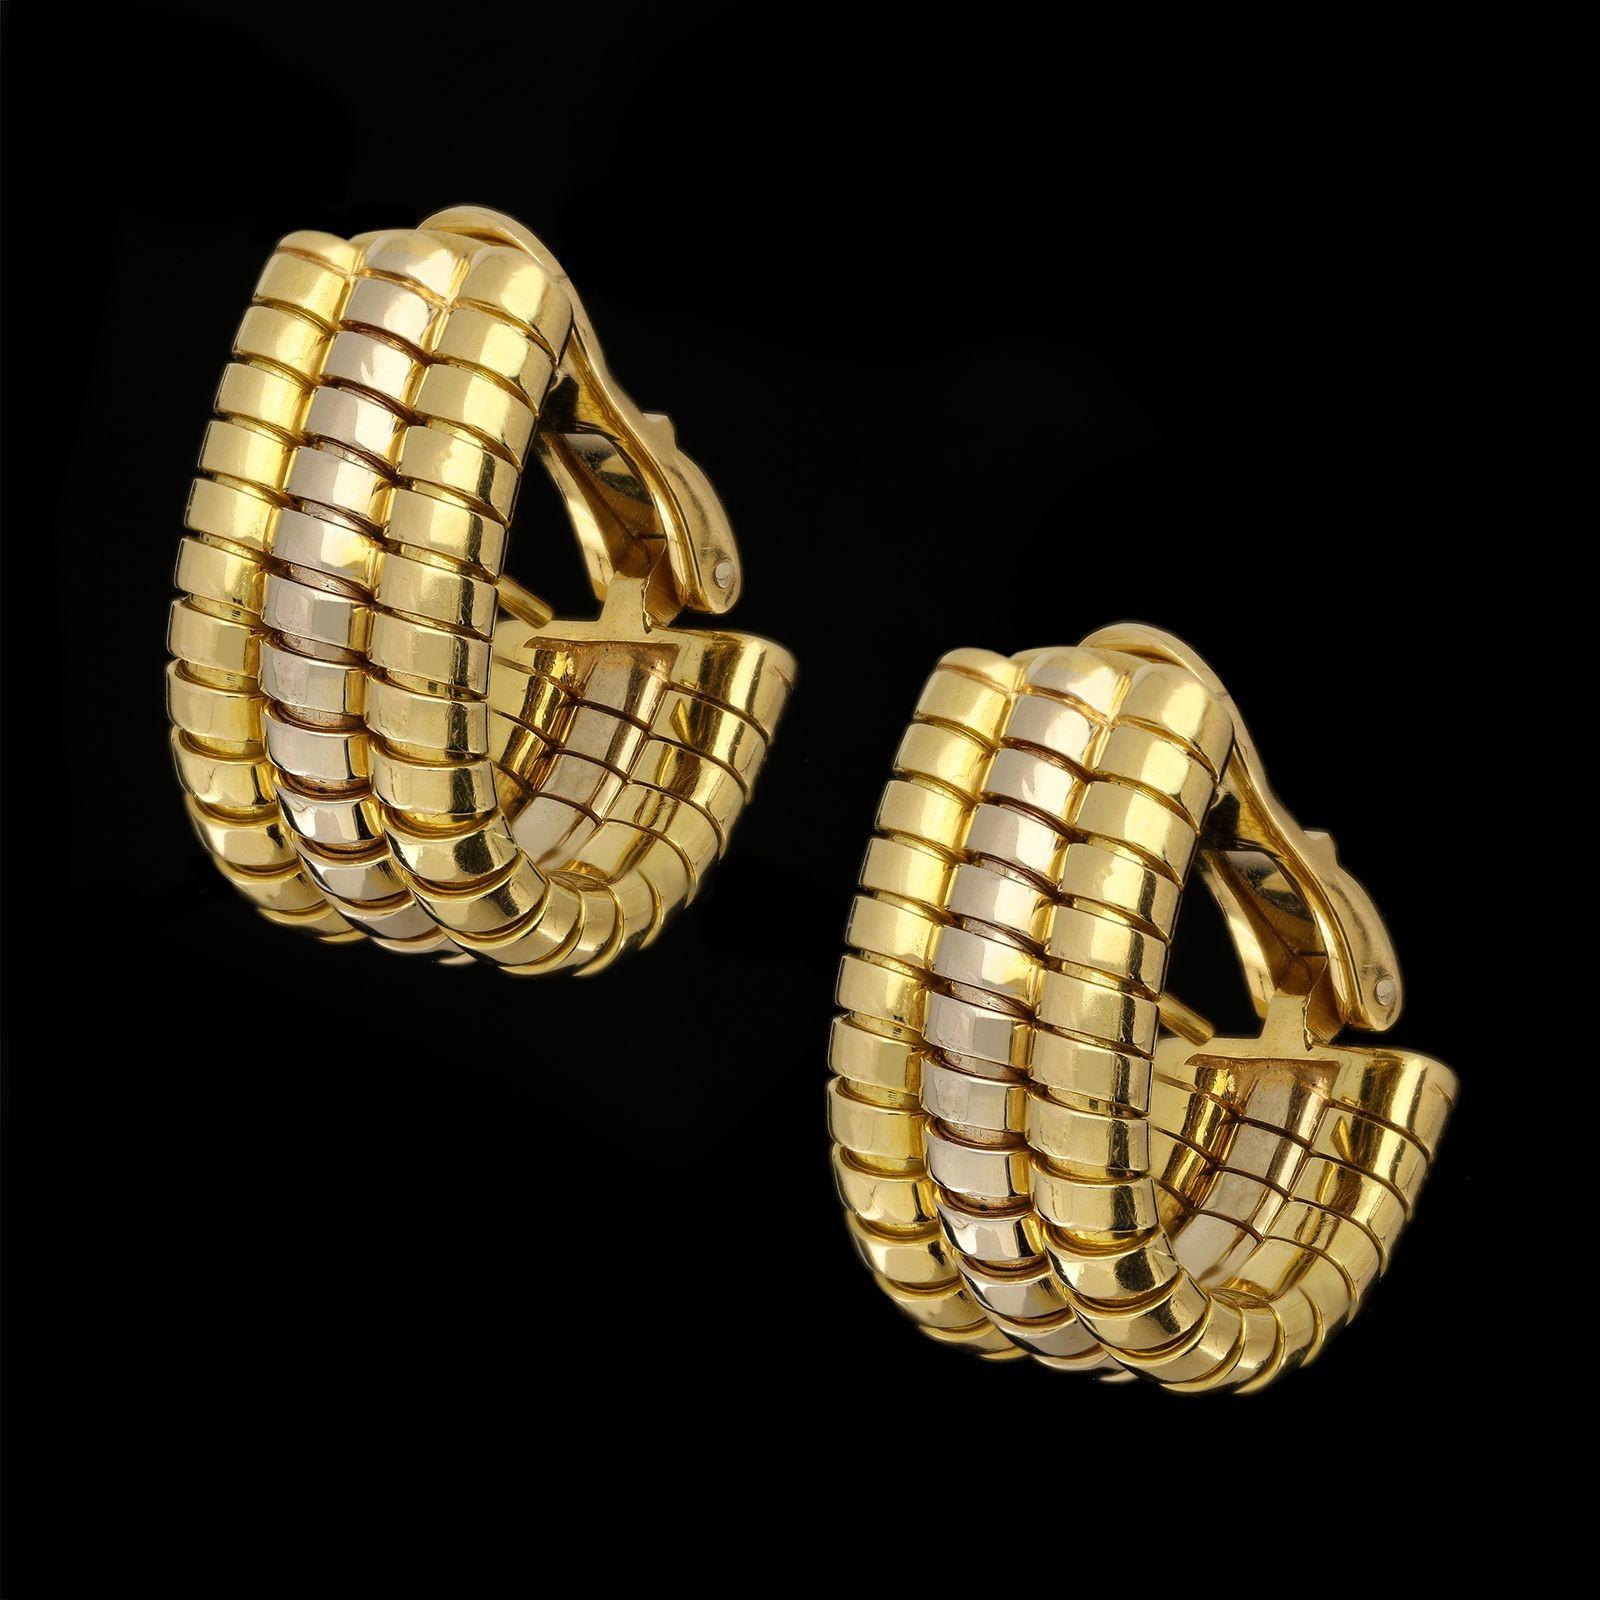 A stylish pair of Vintage Tubogas earrings by Bulgari c.1980s, the wide flat hoop style earrings in 18ct yellow and white gold formed of three rows which curl under and hug the ear, the outer two are yellow gold and the inner one white all with the